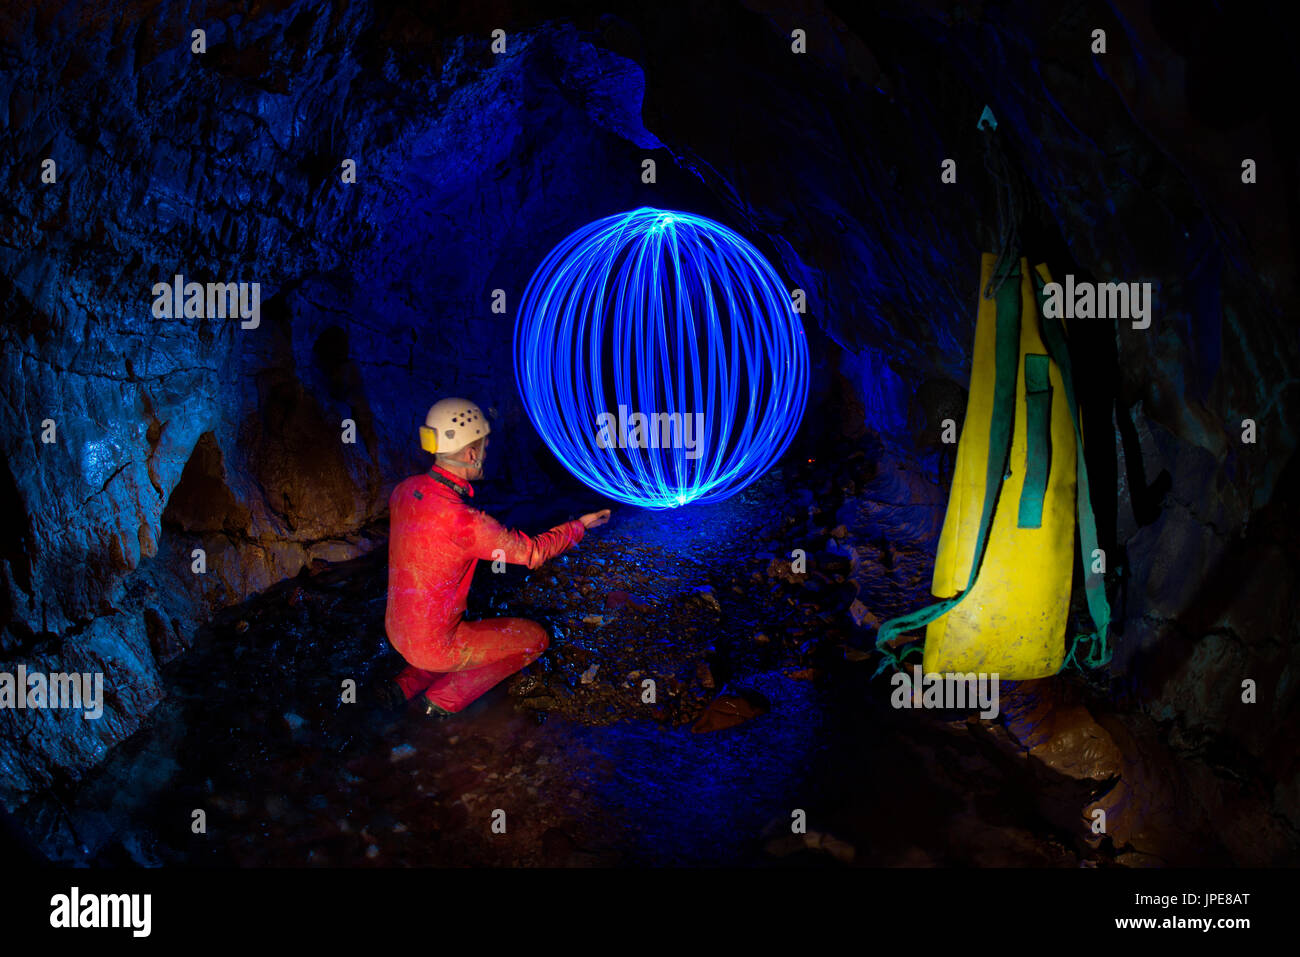 7 Fontane cave, Liguria, Italy. A caver is exploring a new cave. Orb of light underground Stock Photo